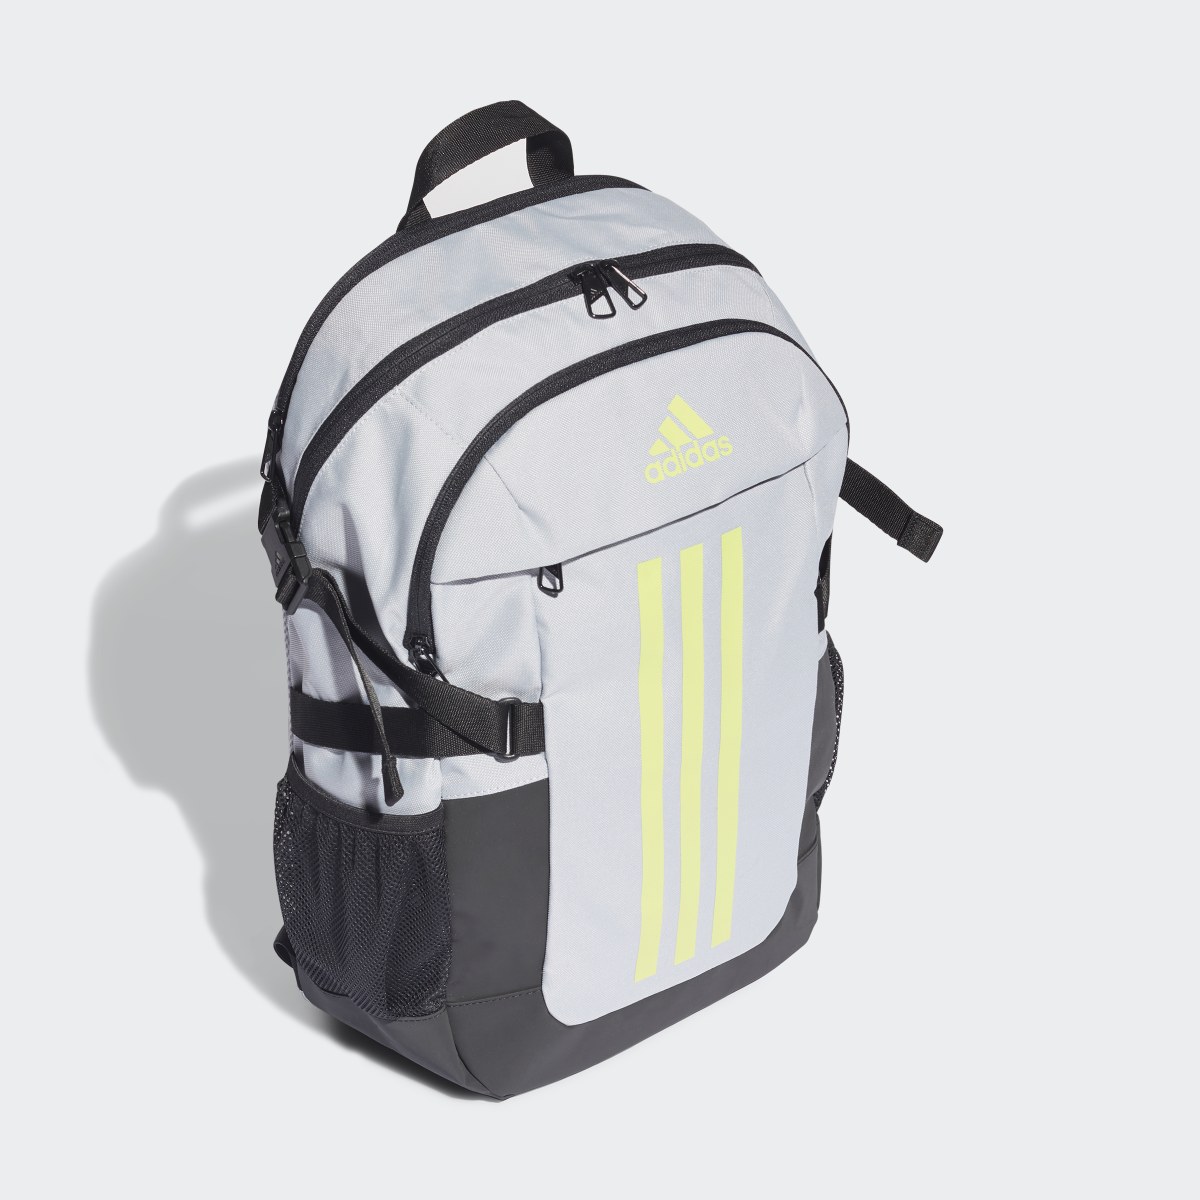 Adidas Power Backpack. 4